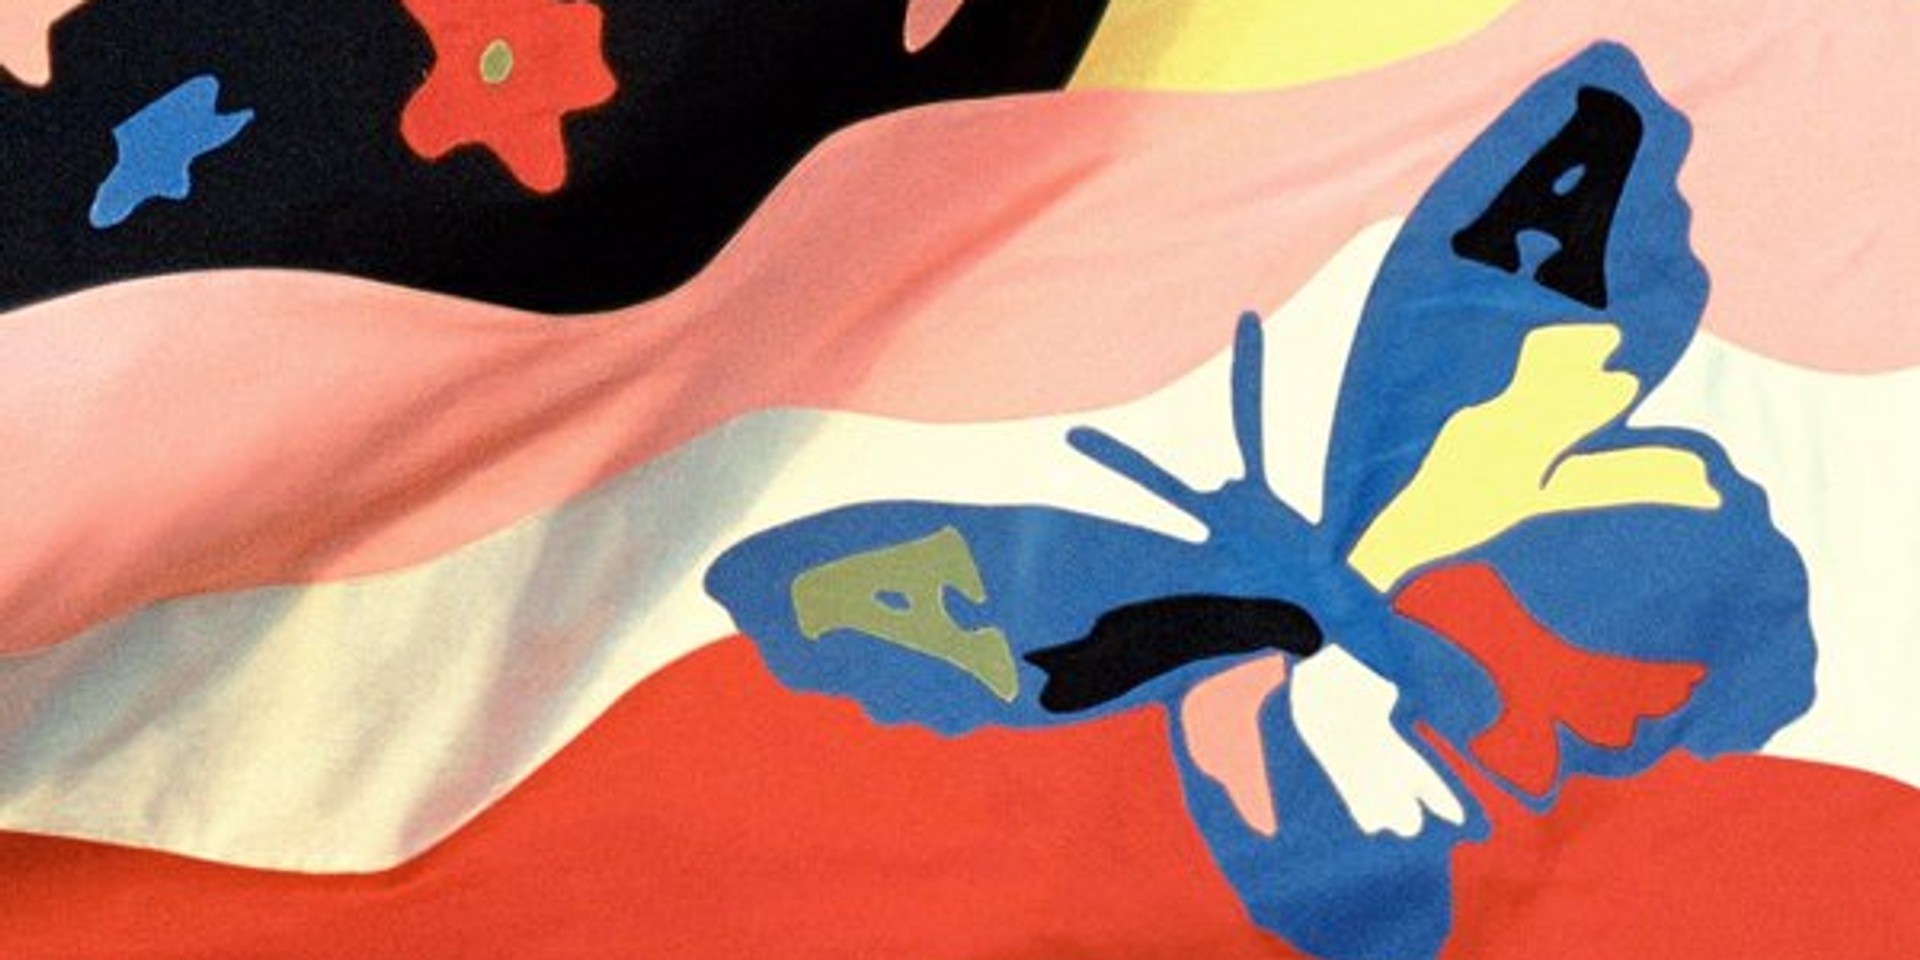 The Avalanches' title and artwork for new album revealed